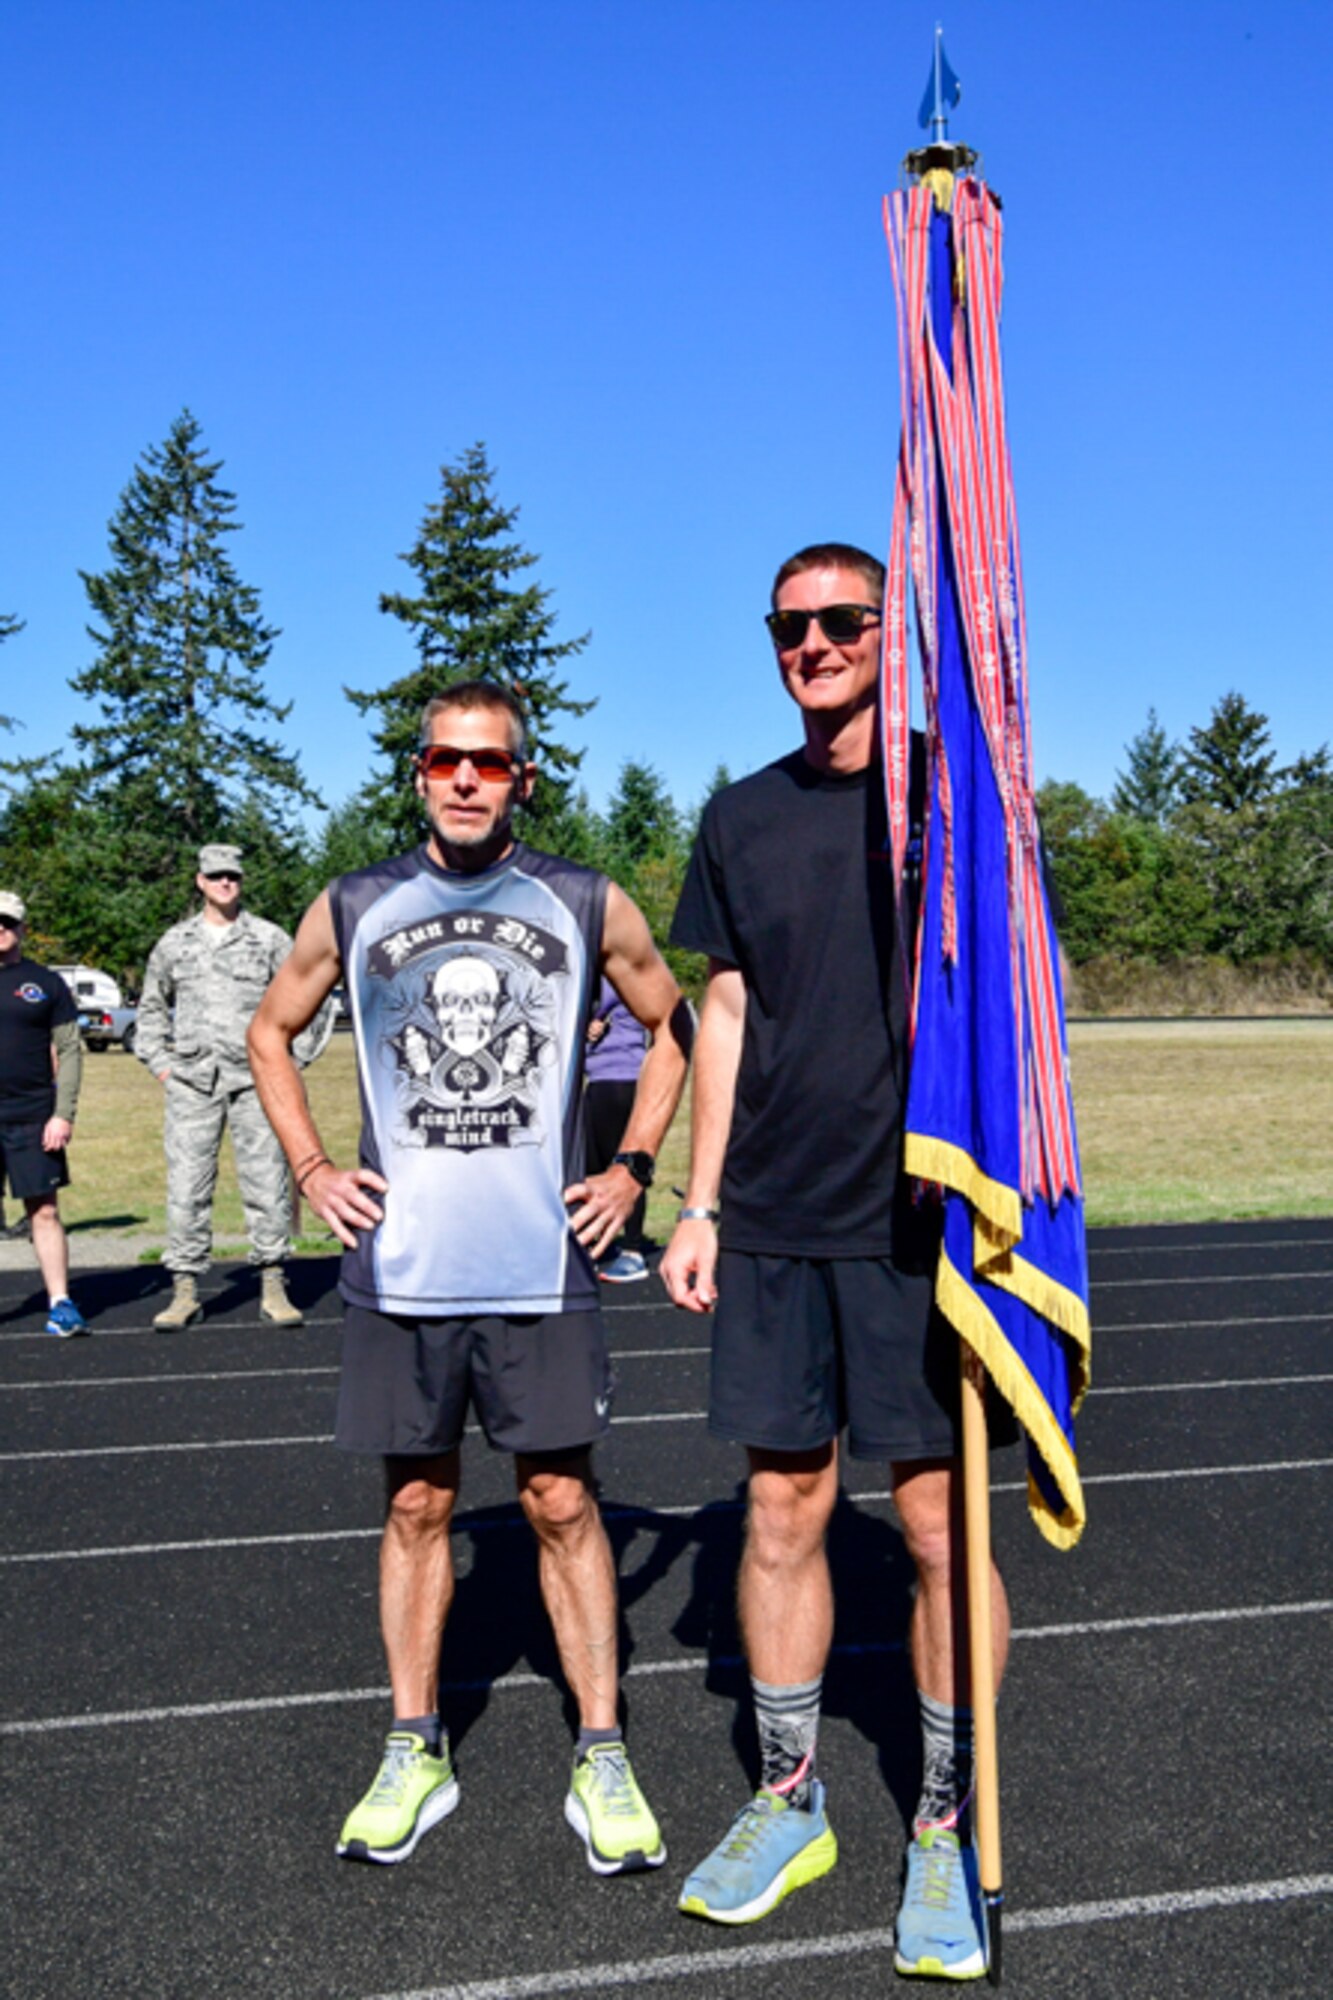 Bruce Robie, left, 225th Support Squadron National Airspace System Defense program manager, and 1st Lt. Krosby Keller, right, 225th Air Defense Squadron air battle manager, proudly hold the Western Air Defense Sector colors after completing 174 miles between them during the Joint Base Lewis-McChord 24-Hour POW/MIA Remembrance Run Sept. 19, 2018.  Keller placed first in individual standings with 100 miles and Robie finished second with 74 miles. (U.S. Air National Guard photo by Maj. Kimberly Burke)